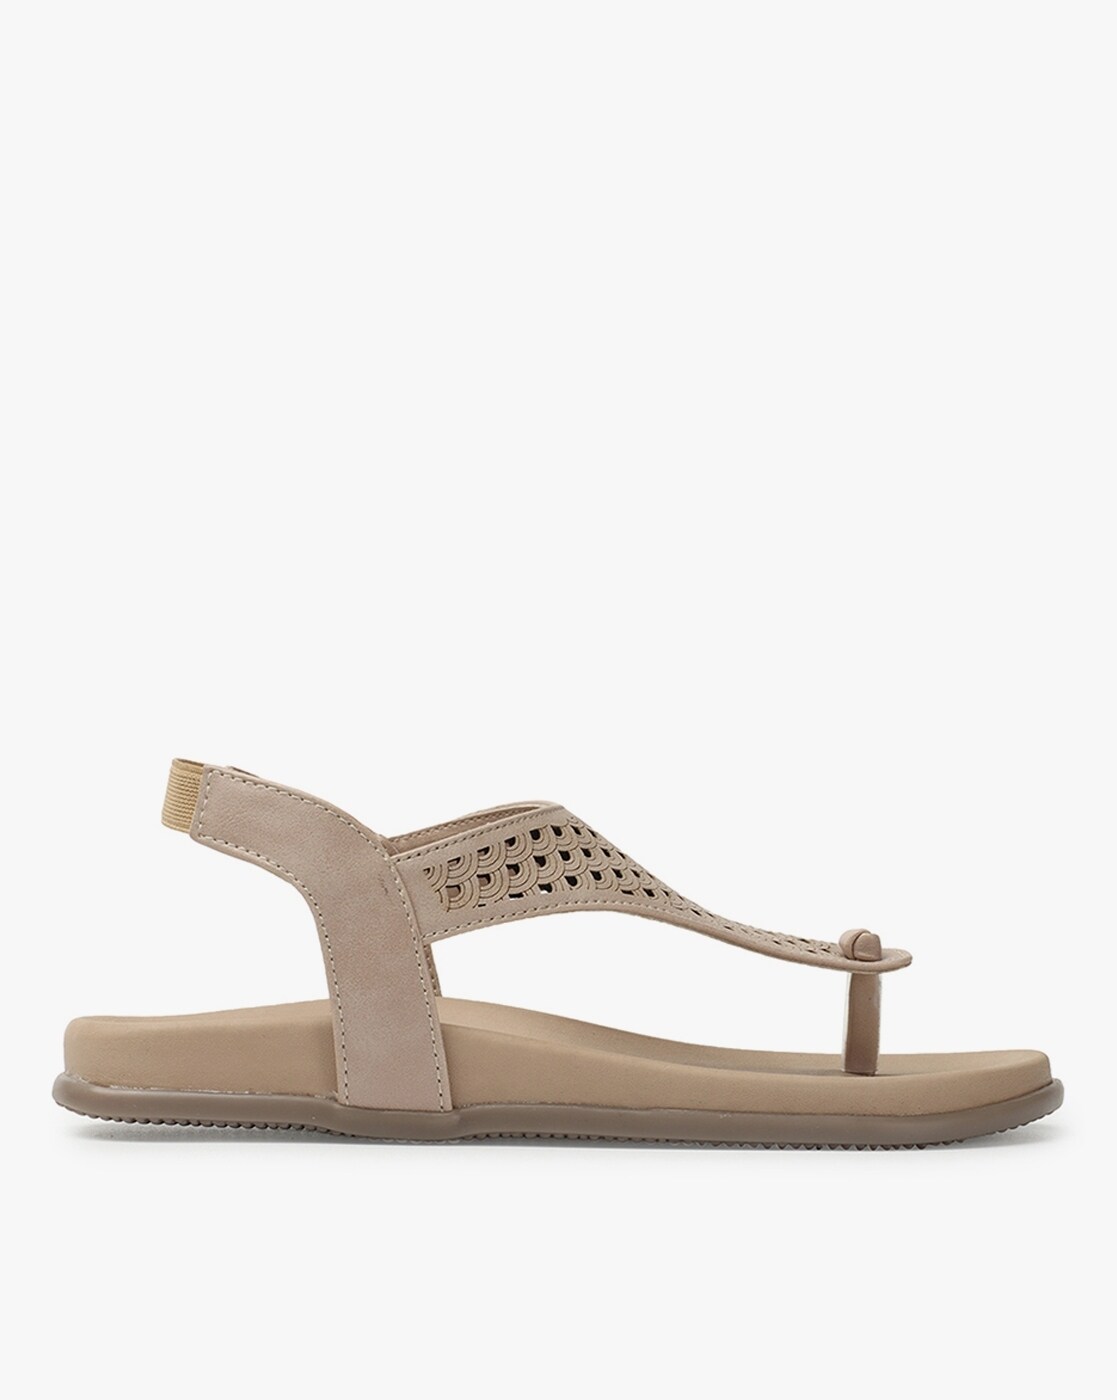 Sperry Women's Sea fish Leather Sandals | Dulles Town Center